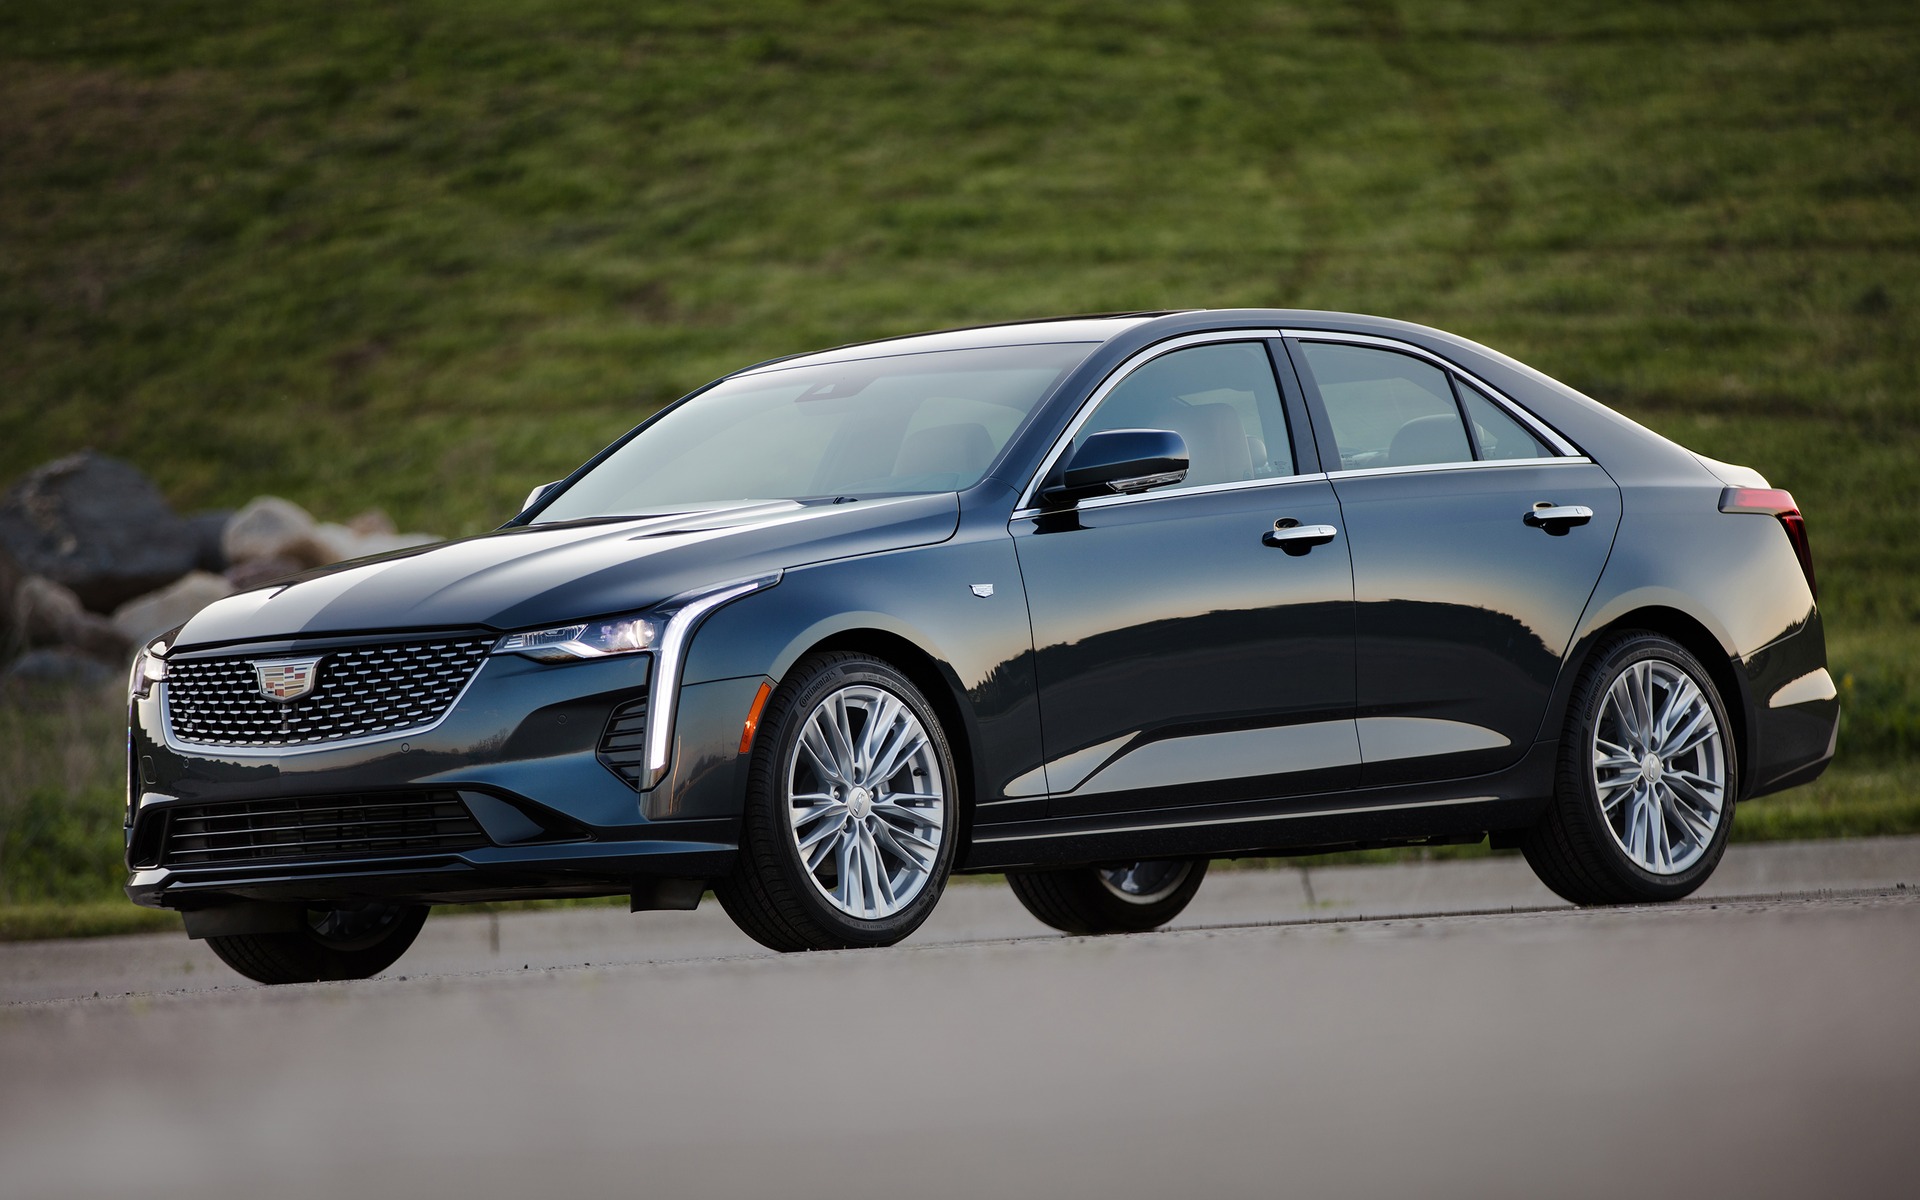 2020 Cadillac CT4: Full Lineup Details Revealed - The Car Guide